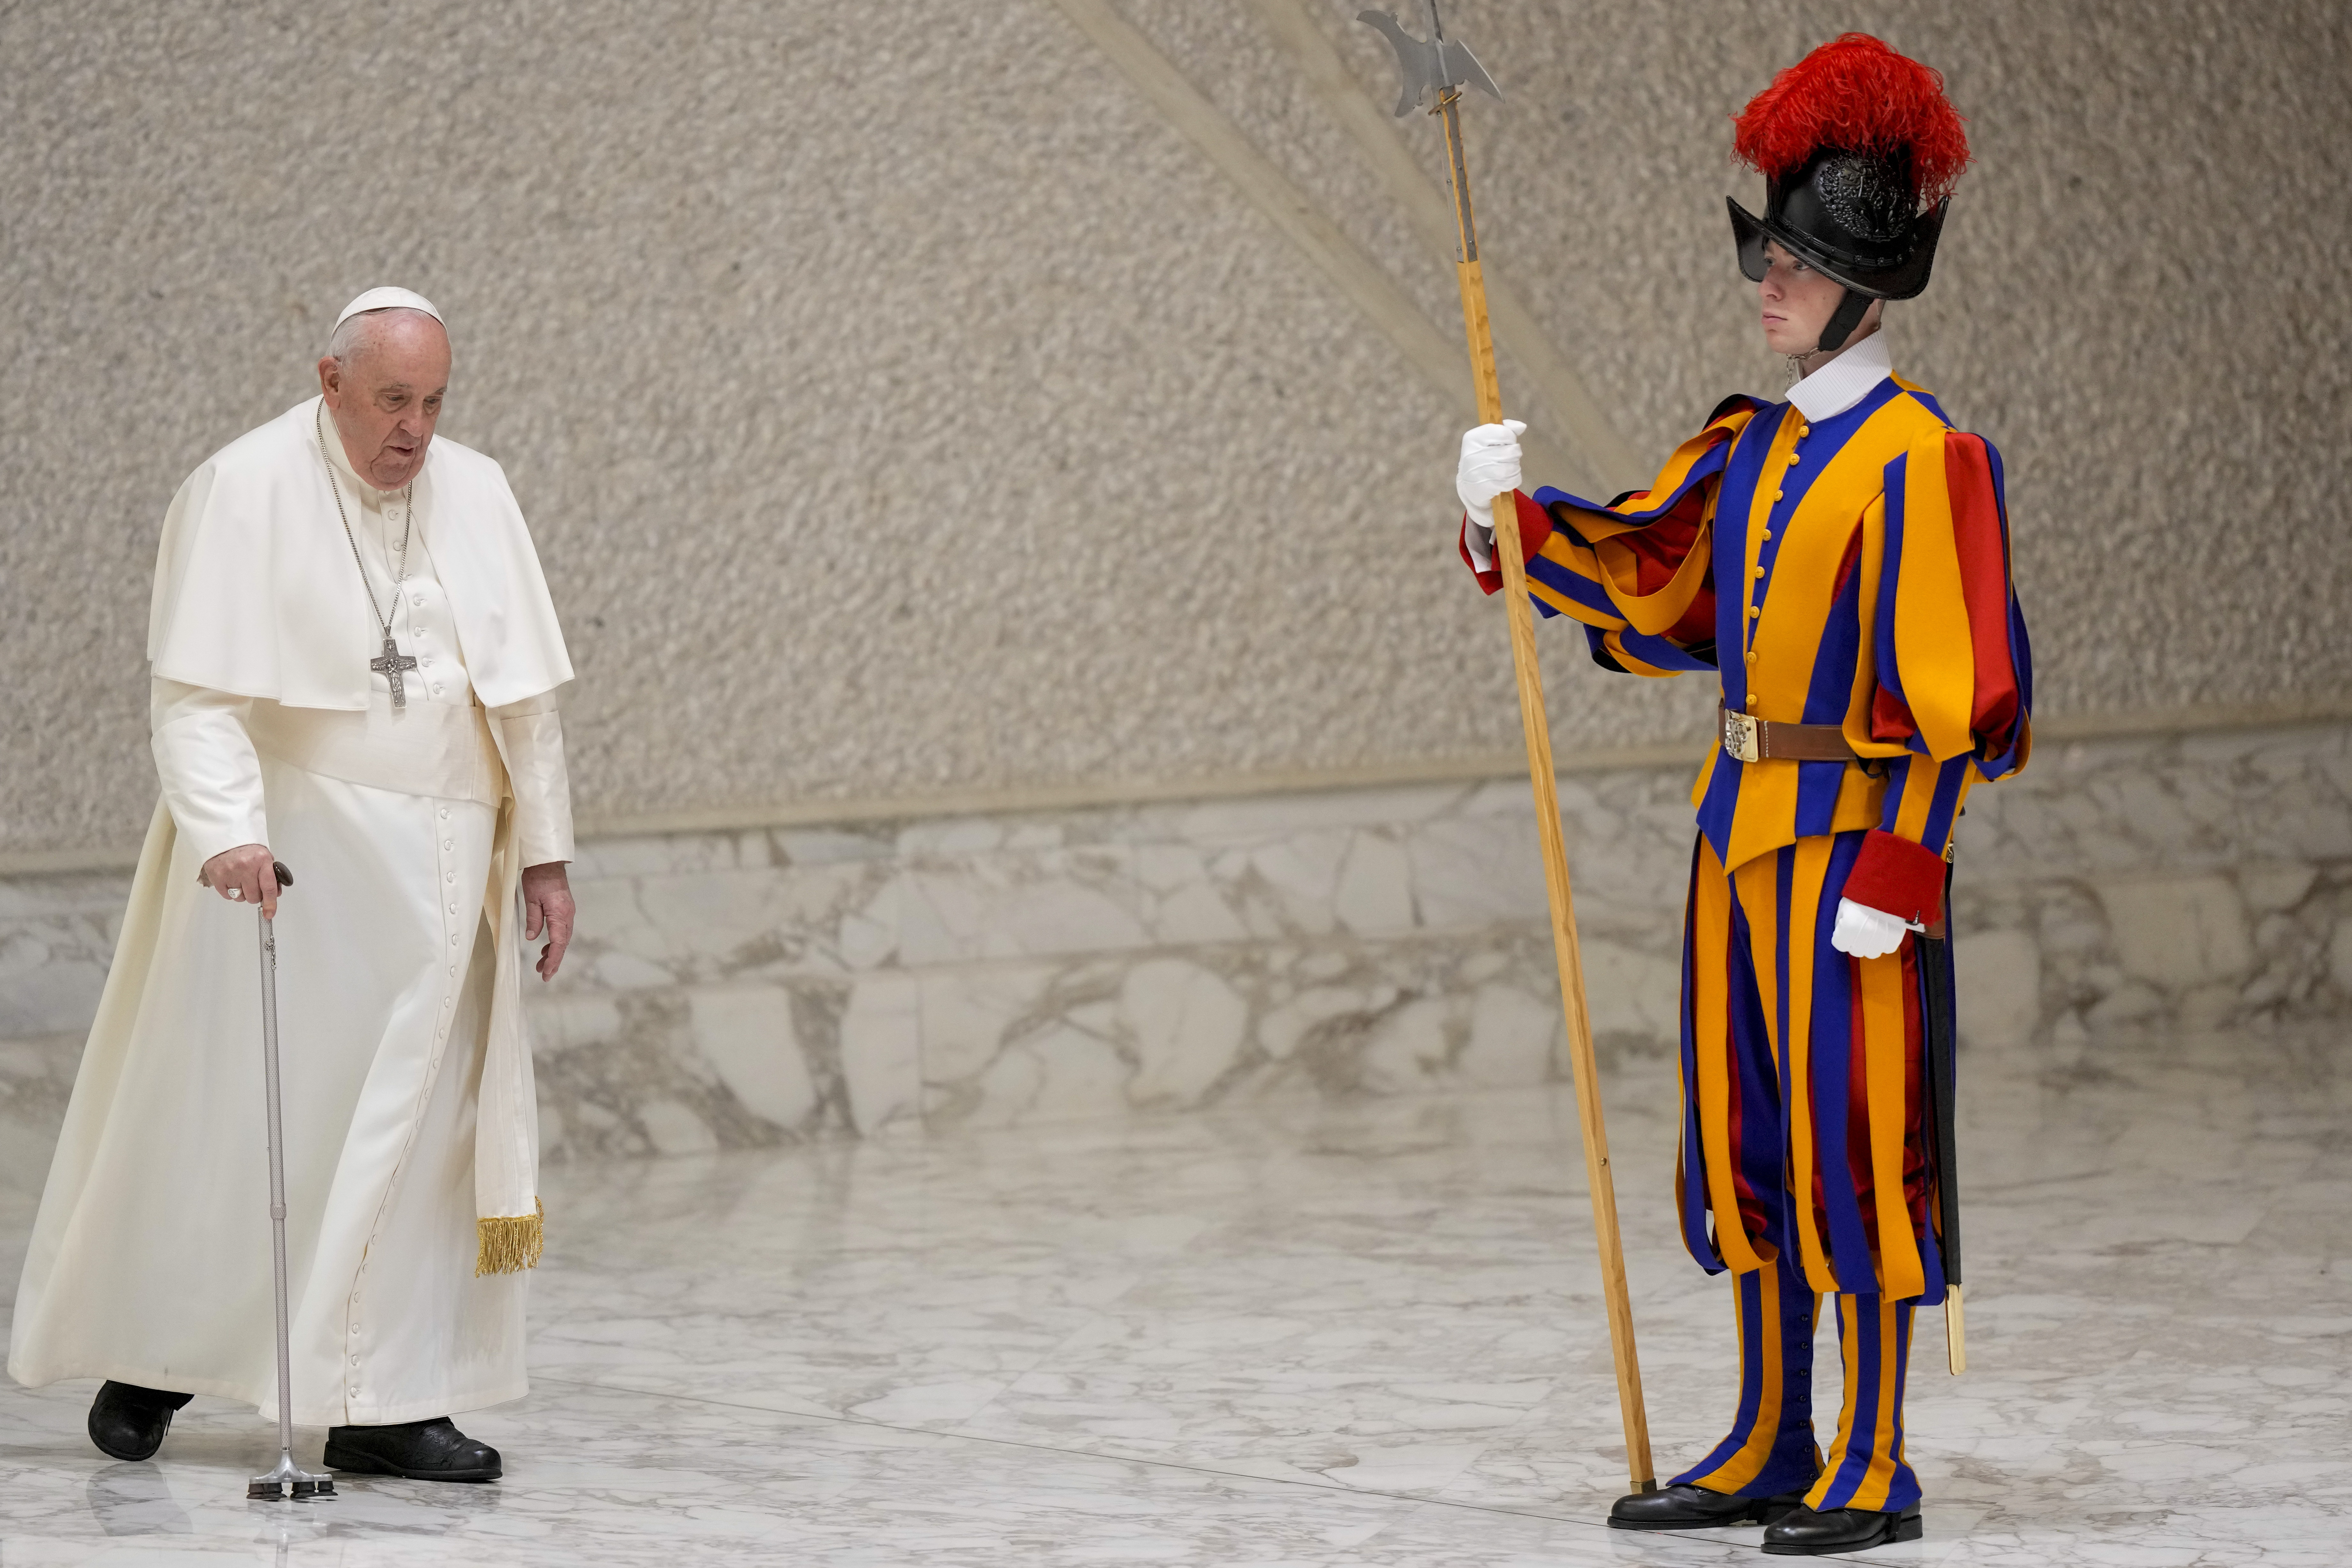 Pope Francis uses his cane to walk by a member of the Swiss Guard, who wears brightly colored stripes